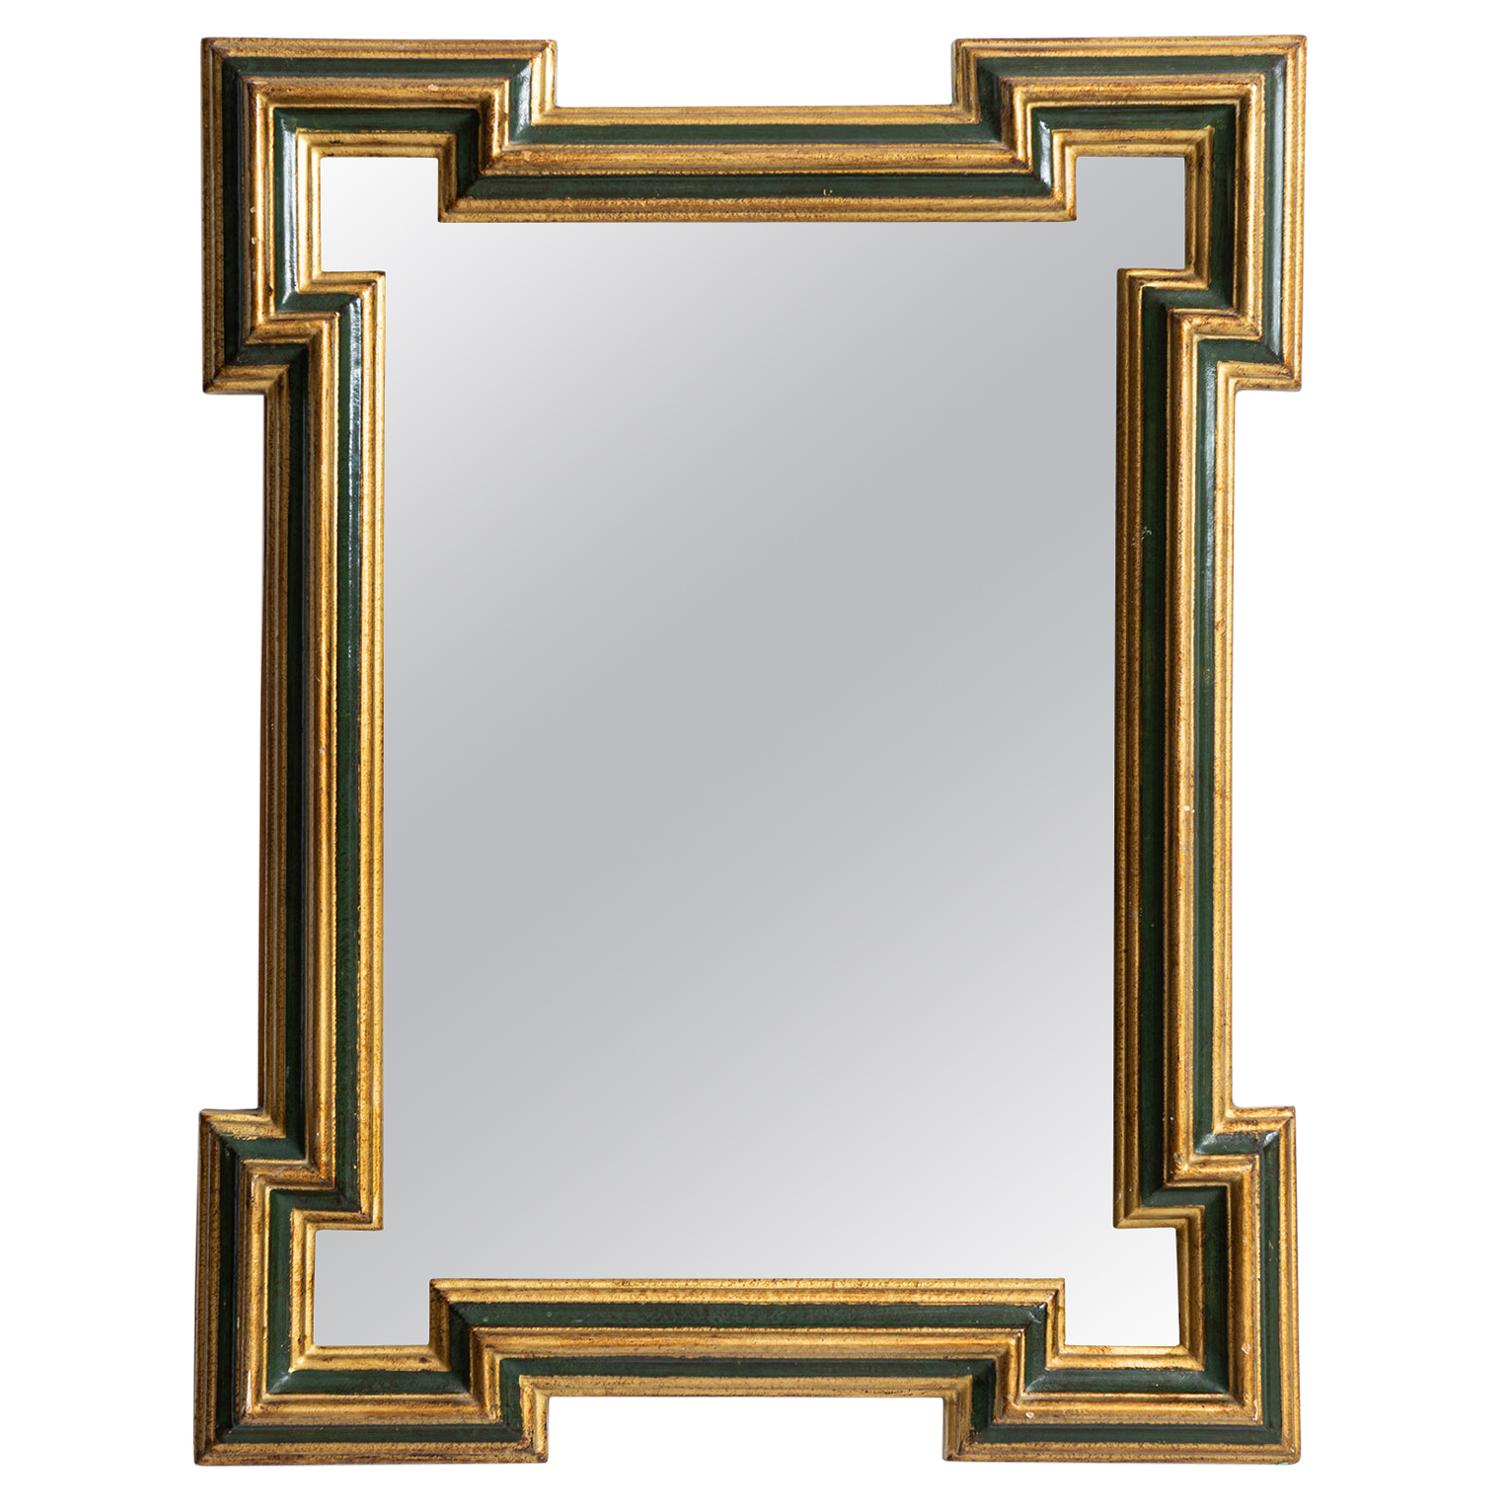 Big and Decorative Mirror Produced in Sweden